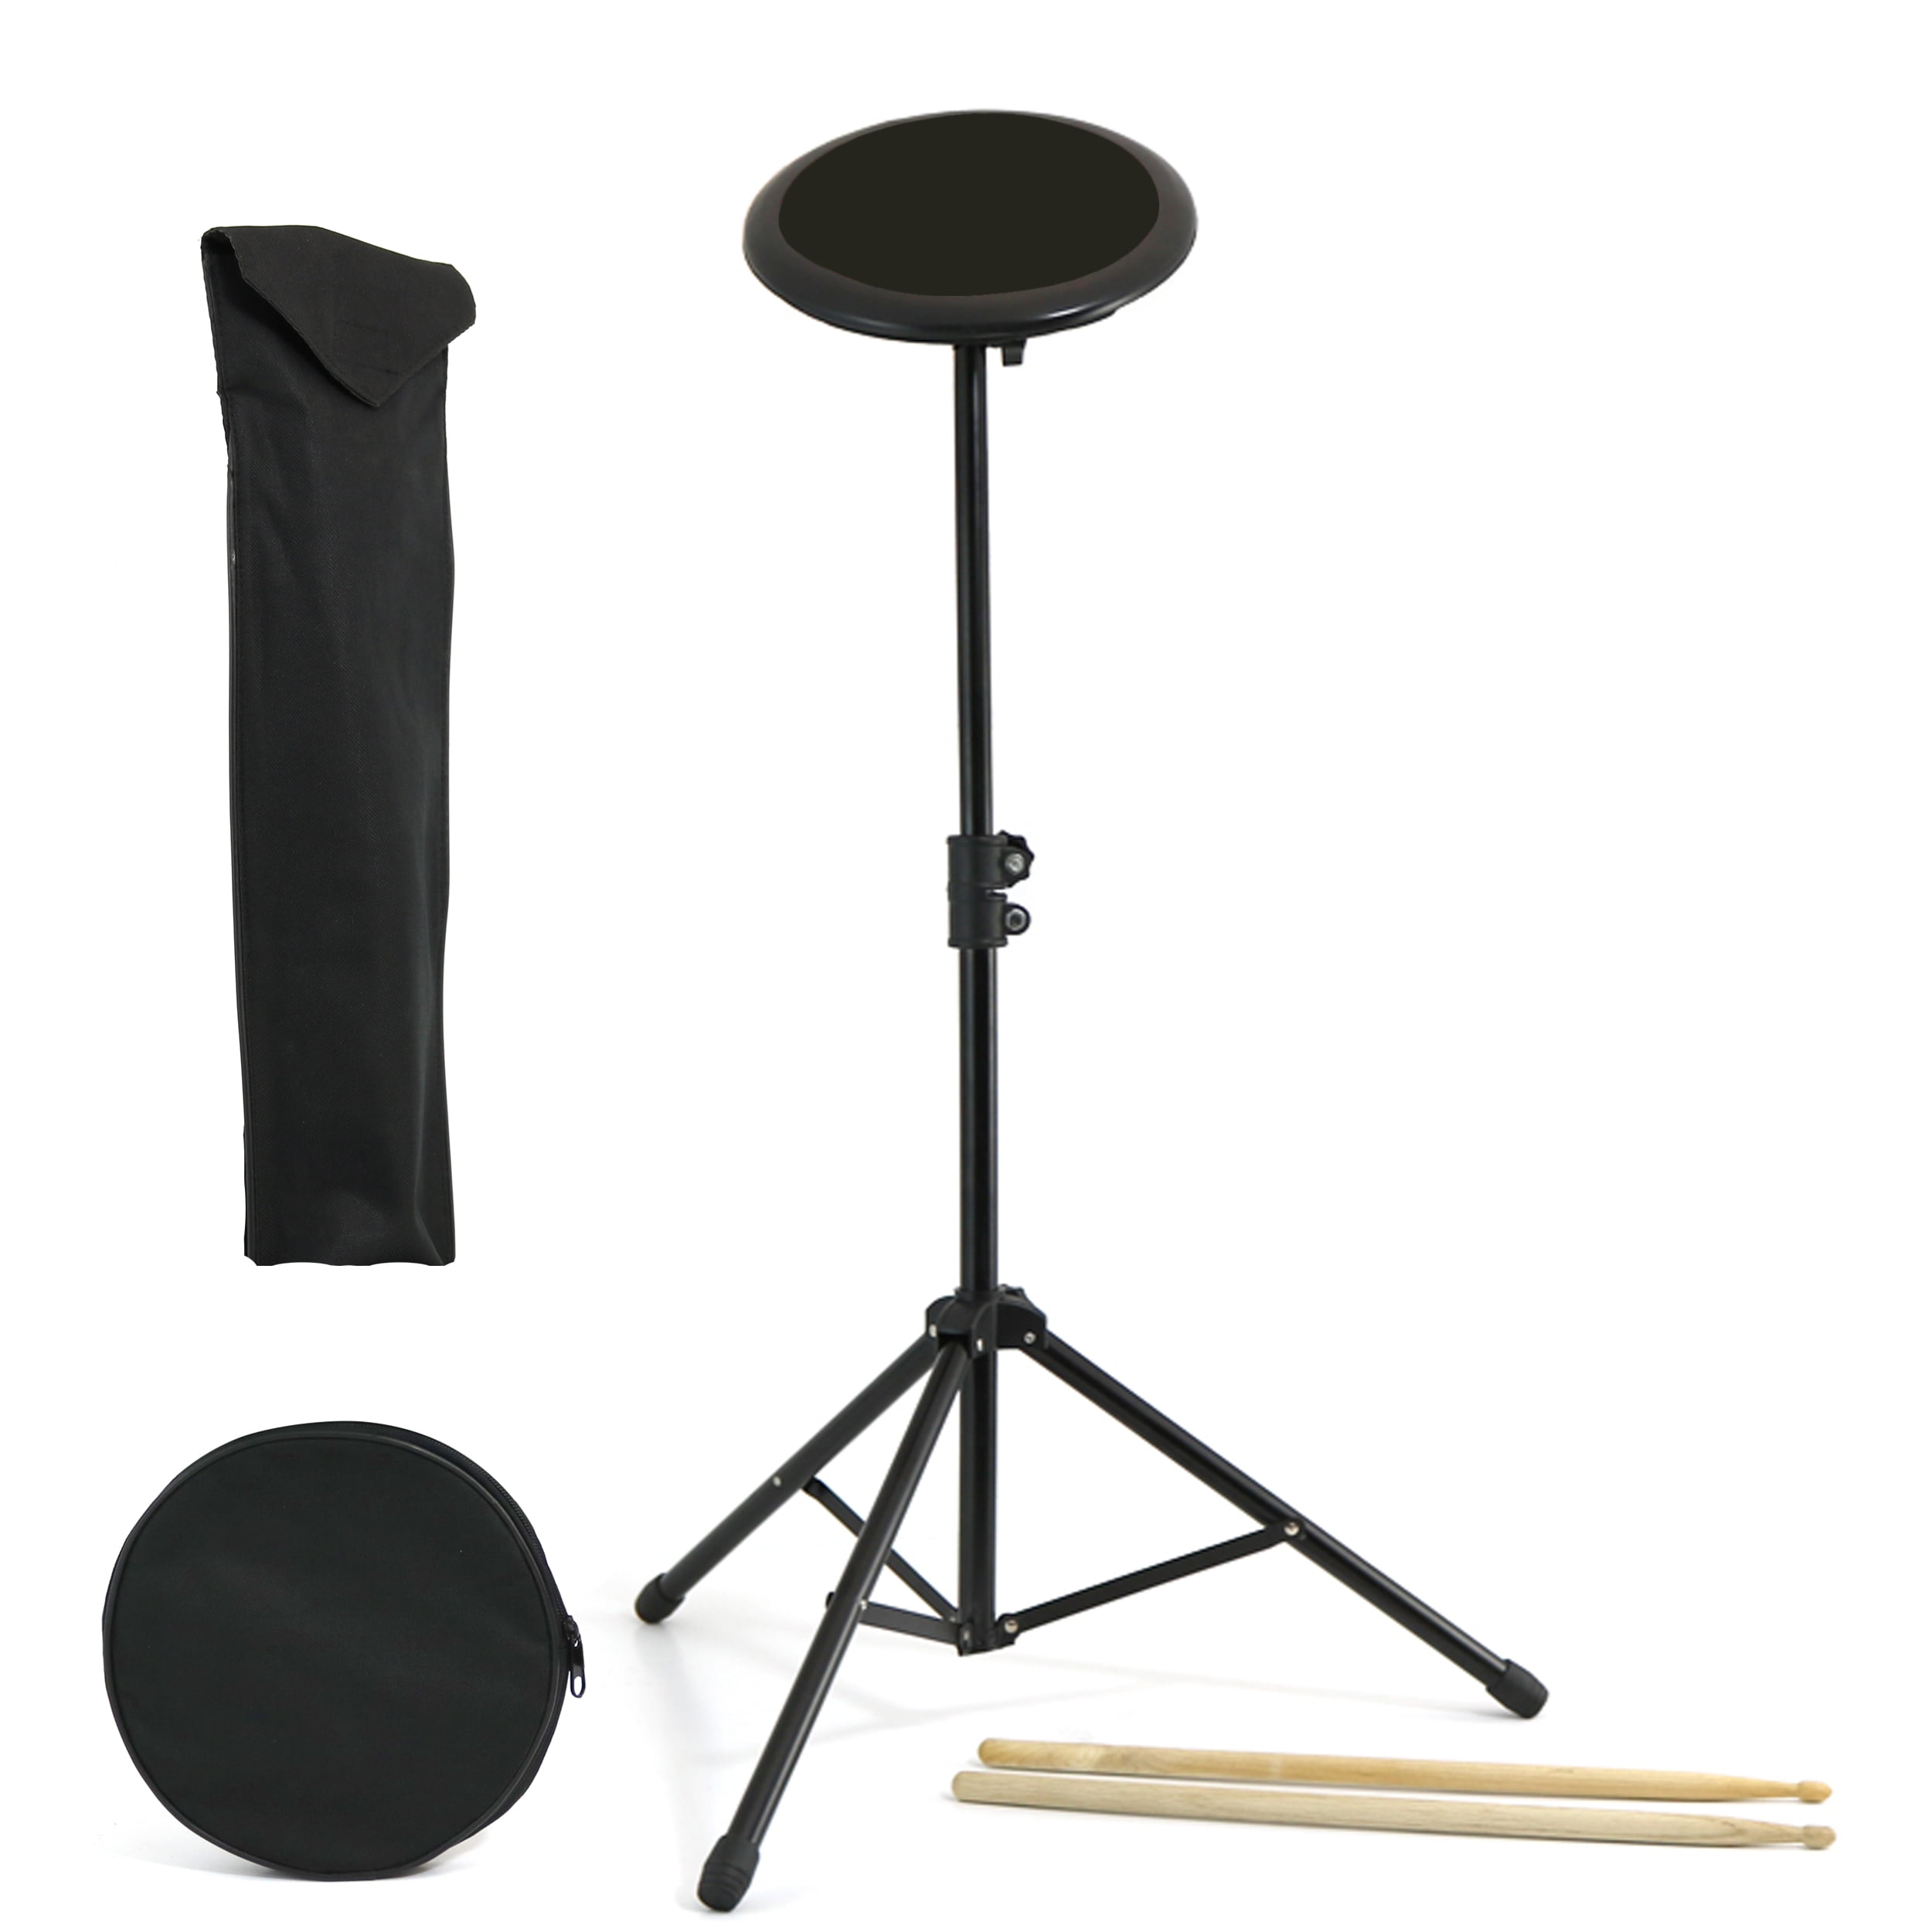 Exercise Pads Drum Mute Pads 5 Drums 3 Cymbals Jazz Drum Mute Pad Drumming Rubber Foam Practice Pad Drum Silencer for Drum Parts Accessories Set 4 Piece Set Black